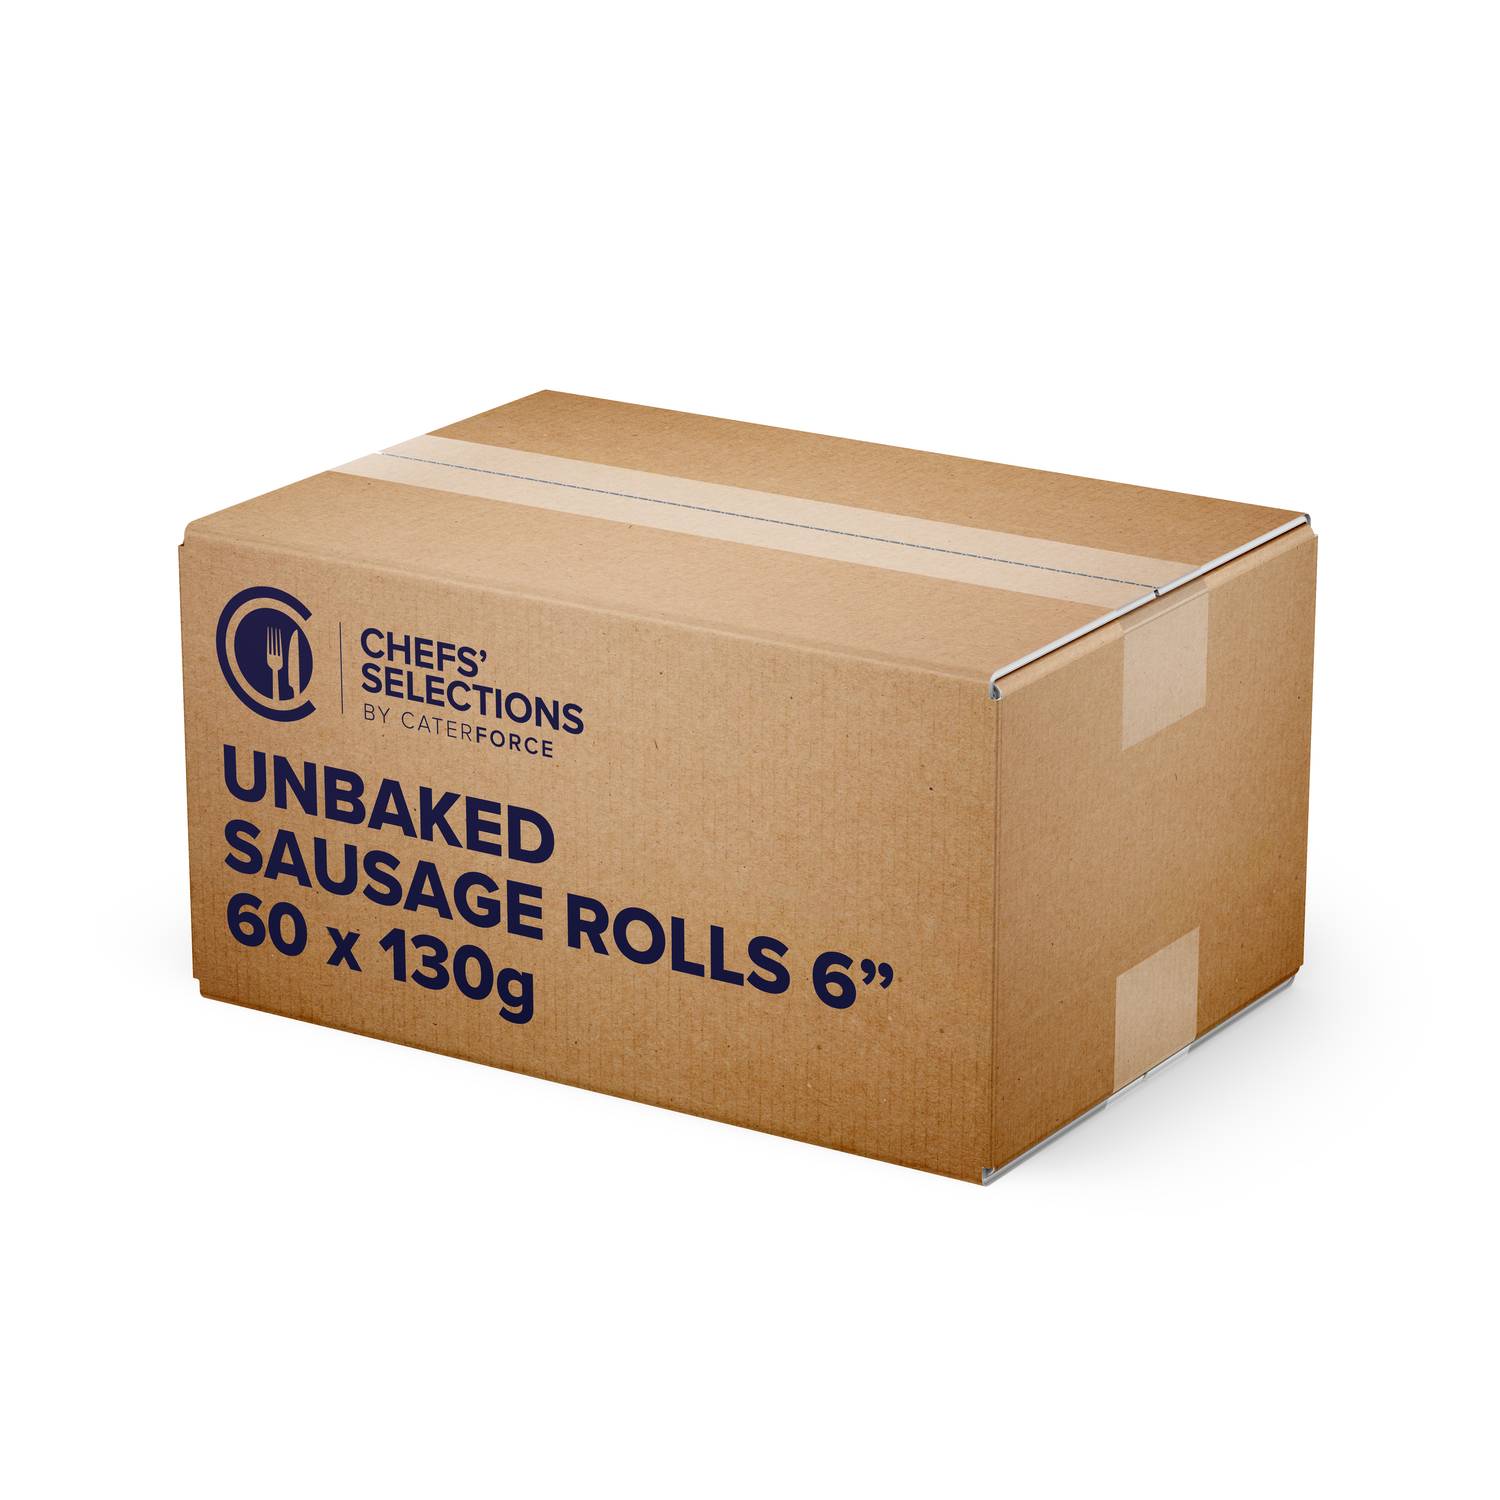 Chefs’ Selections 6″ Sausage Rolls (60 x 130g)